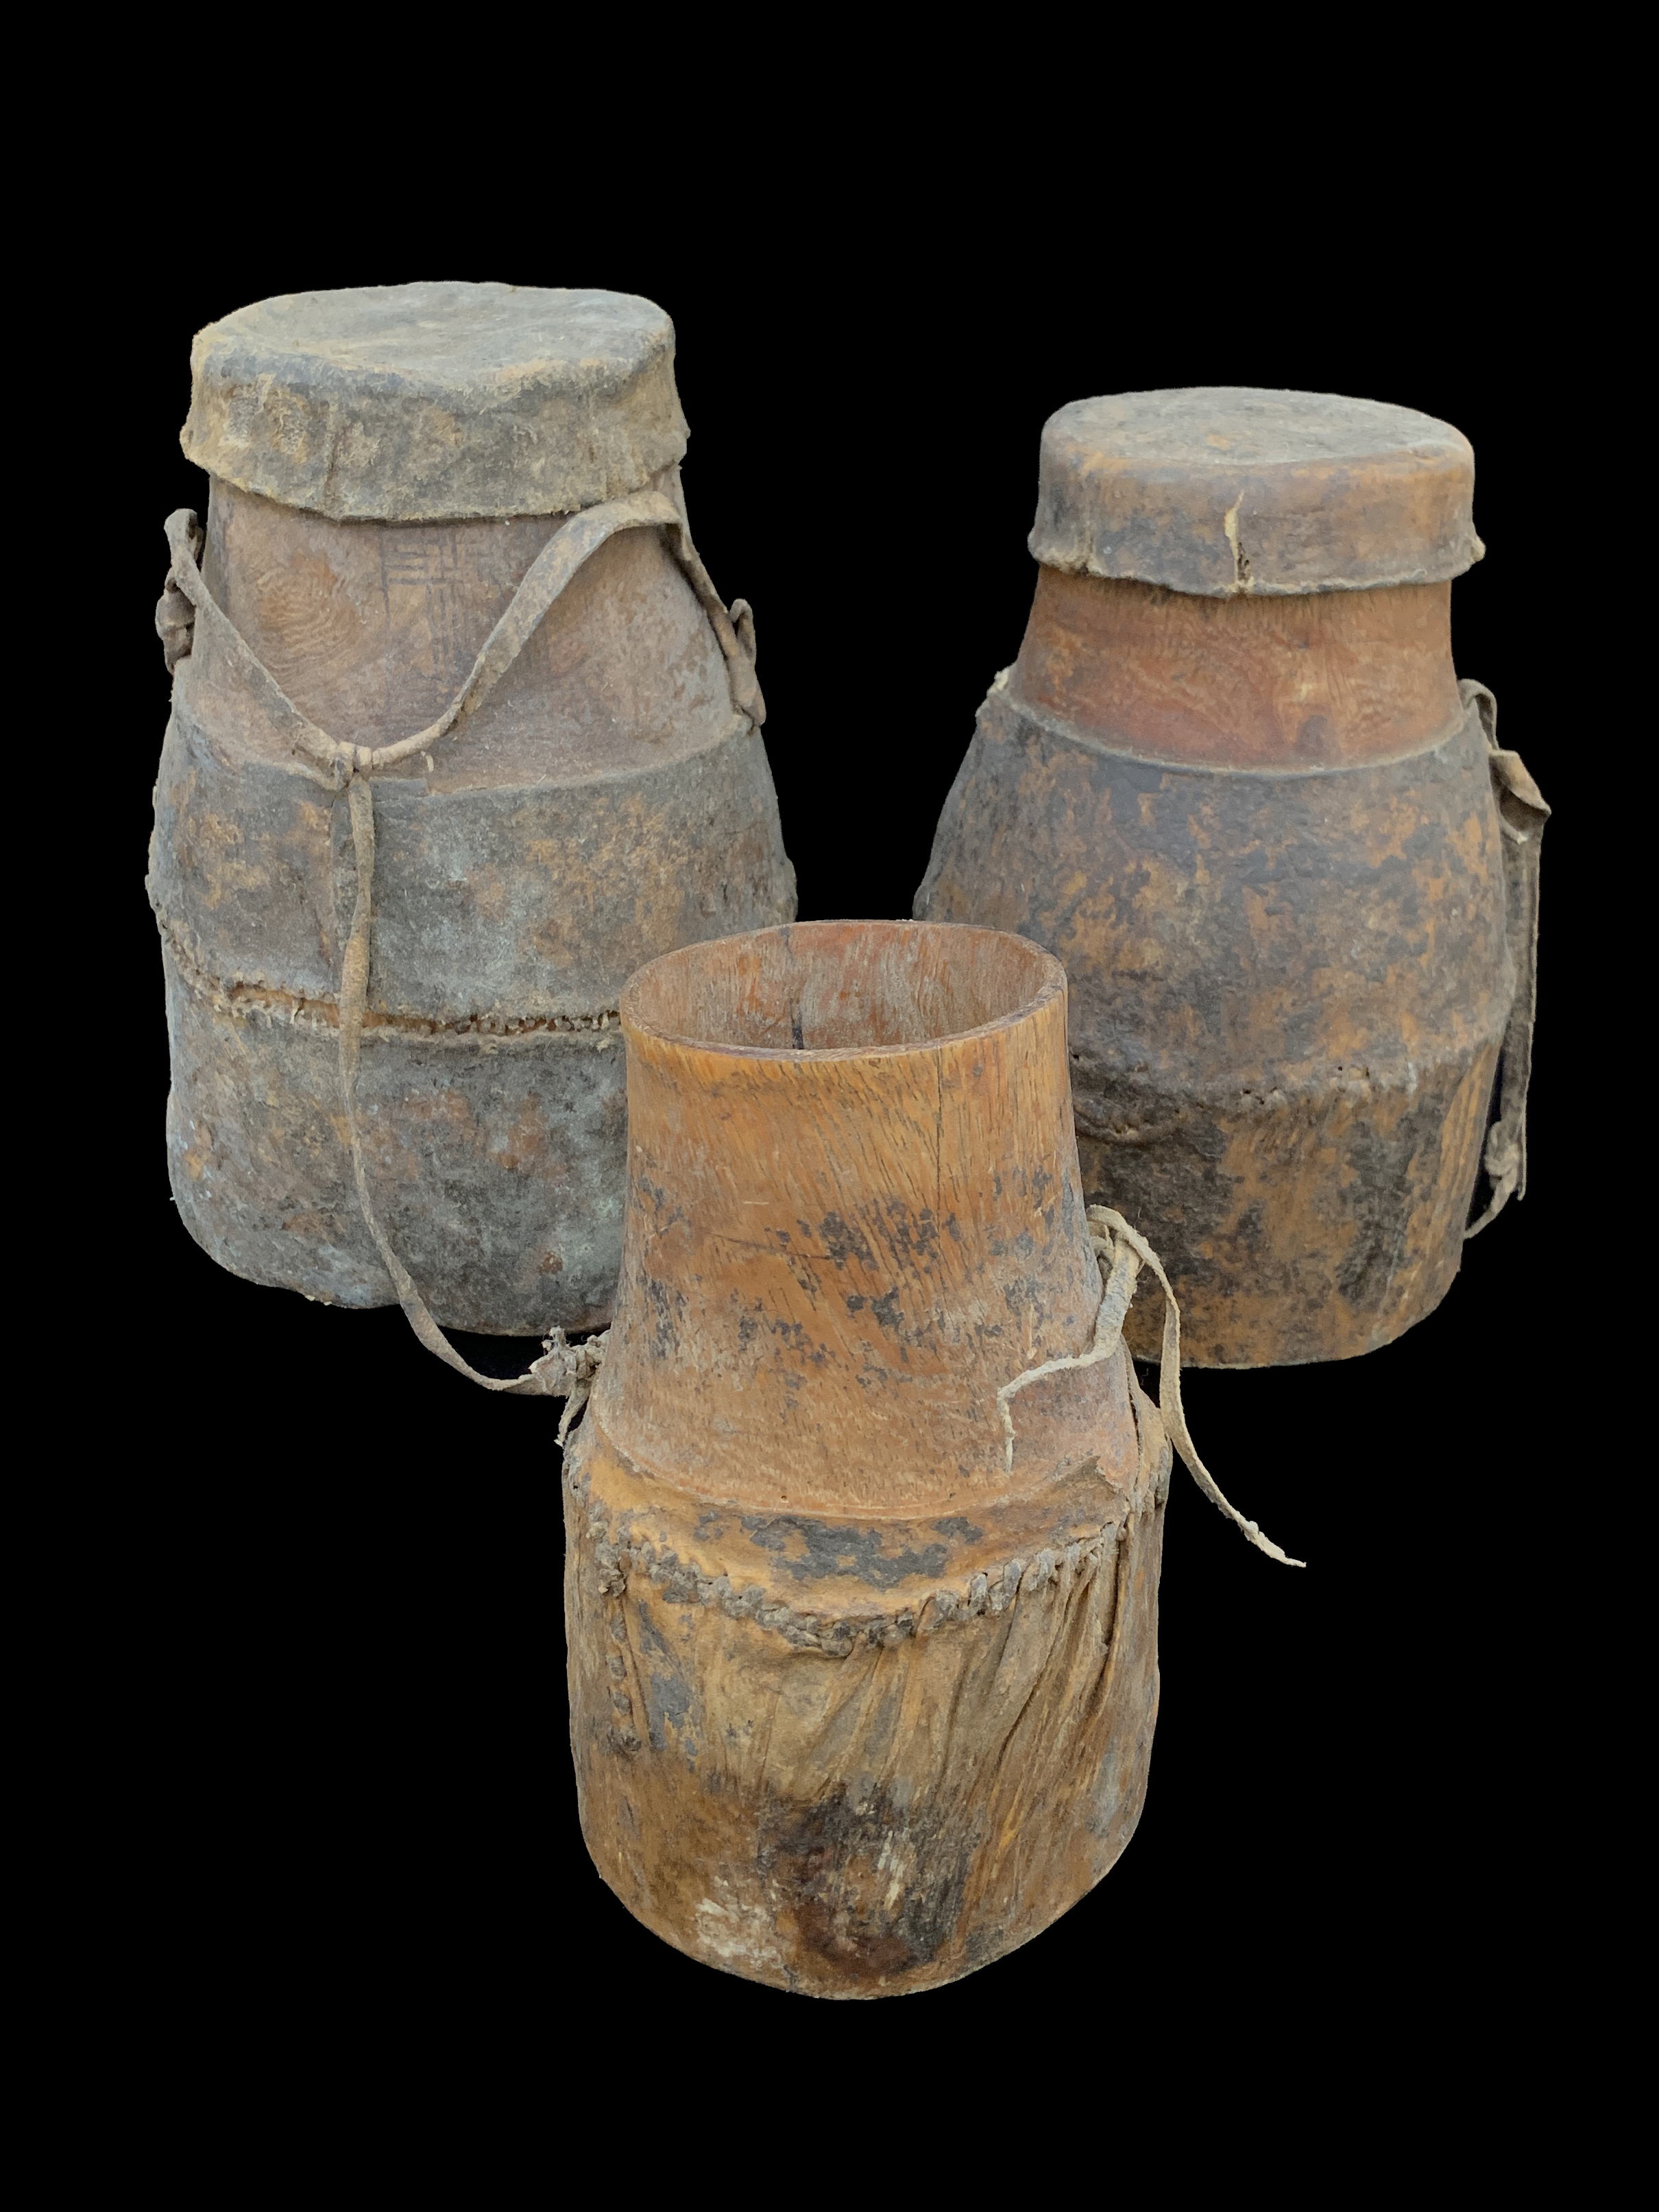 Set of 3 Meat Containers (4) - Pokot and Turkana People, Northern Kenya